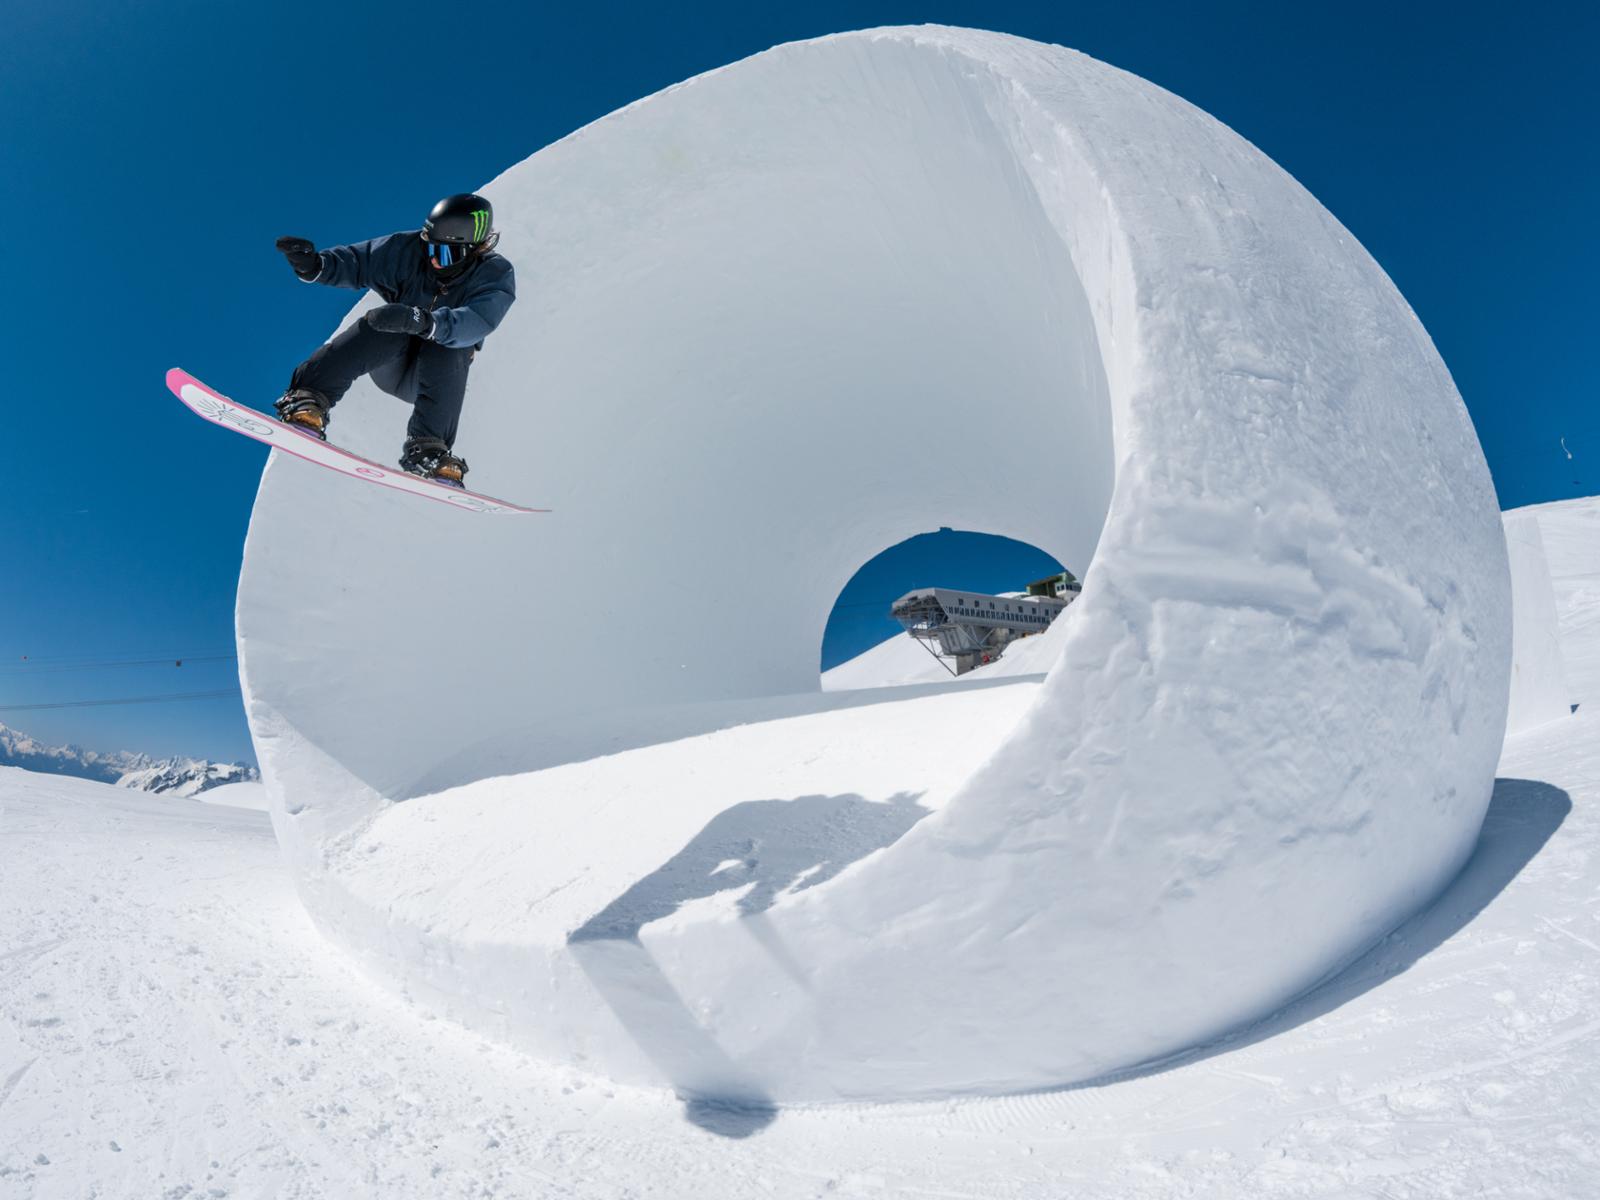 Annika through the wormhole at Nines in Crans Montana. Photo: Fischi